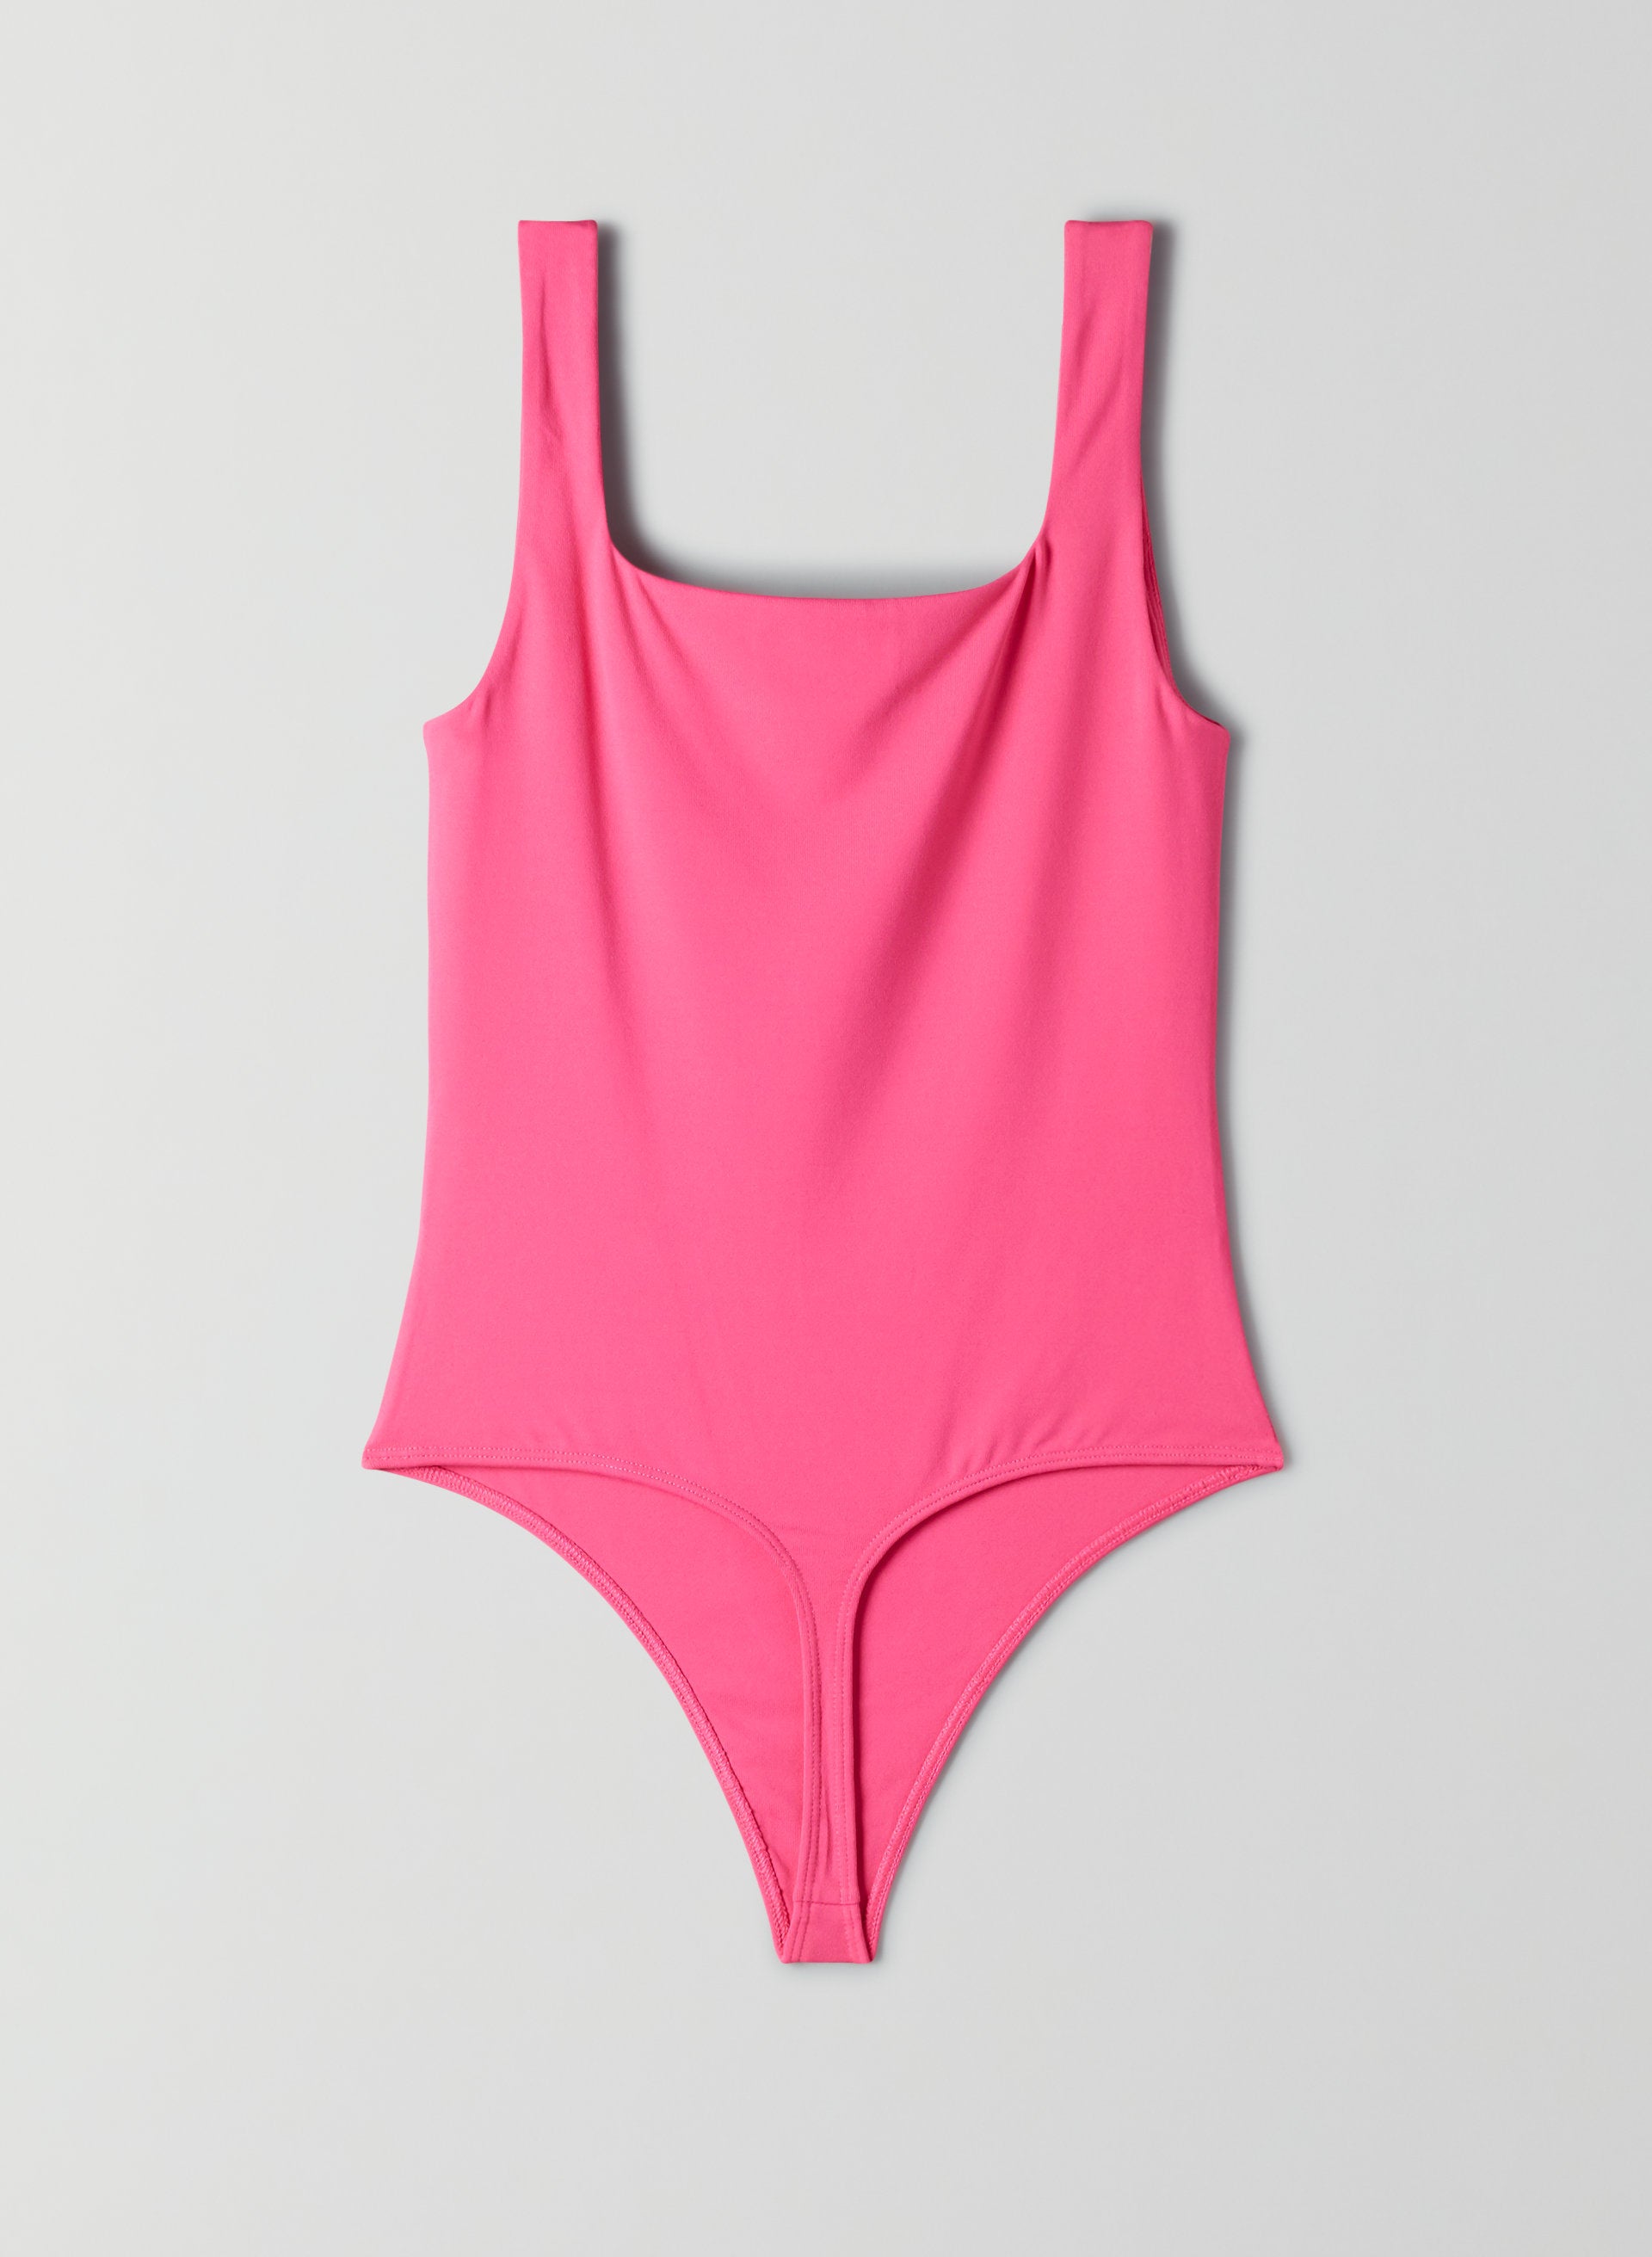  AMAATE Solid Skinny Bodysuit (Color : Hot Pink, Size